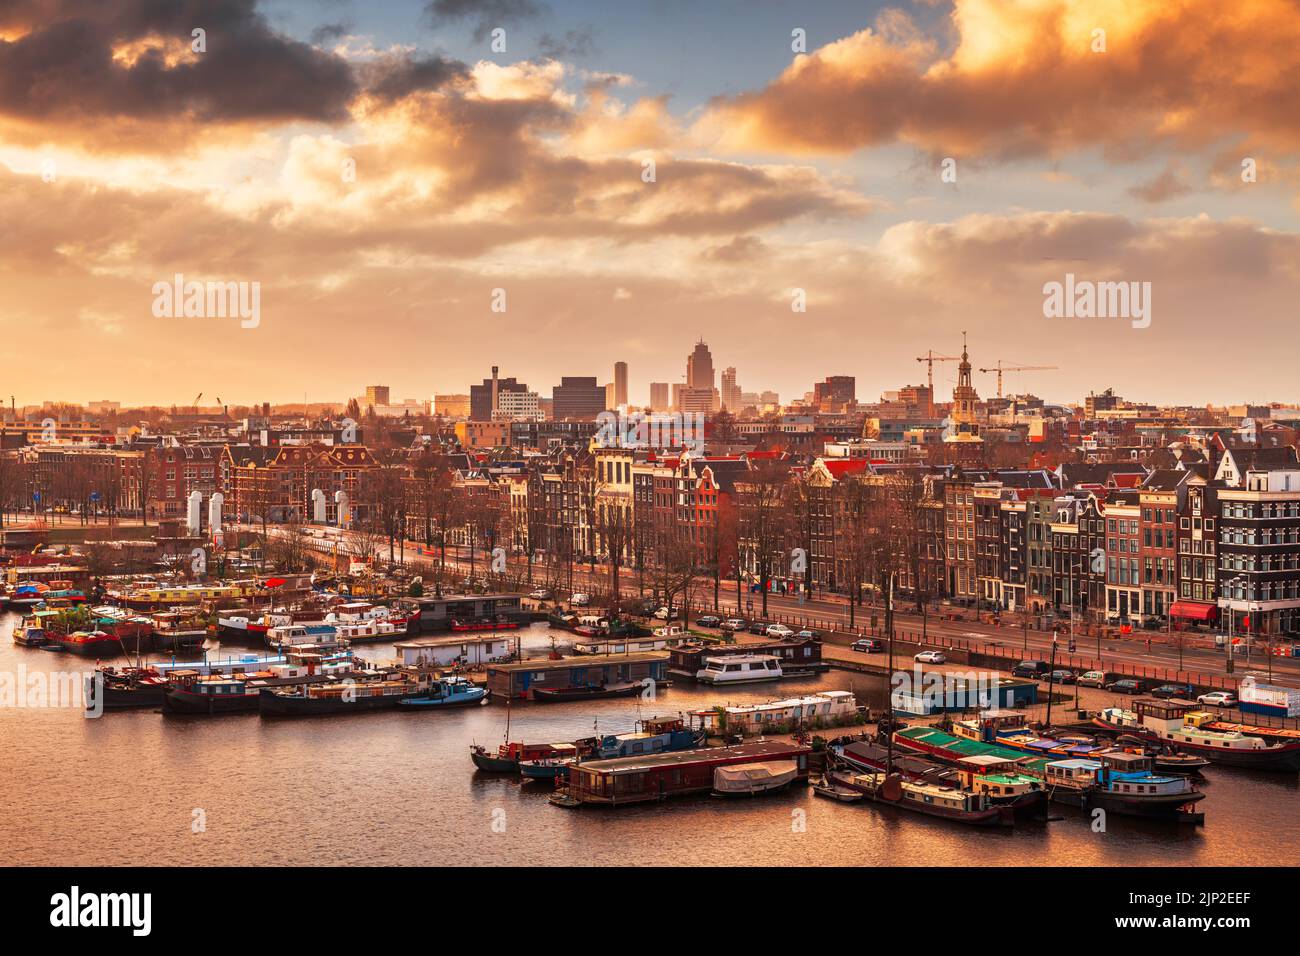 Amsterdam, Netherlands city skyline on the North Sea Canal at dusk. Stock Photo